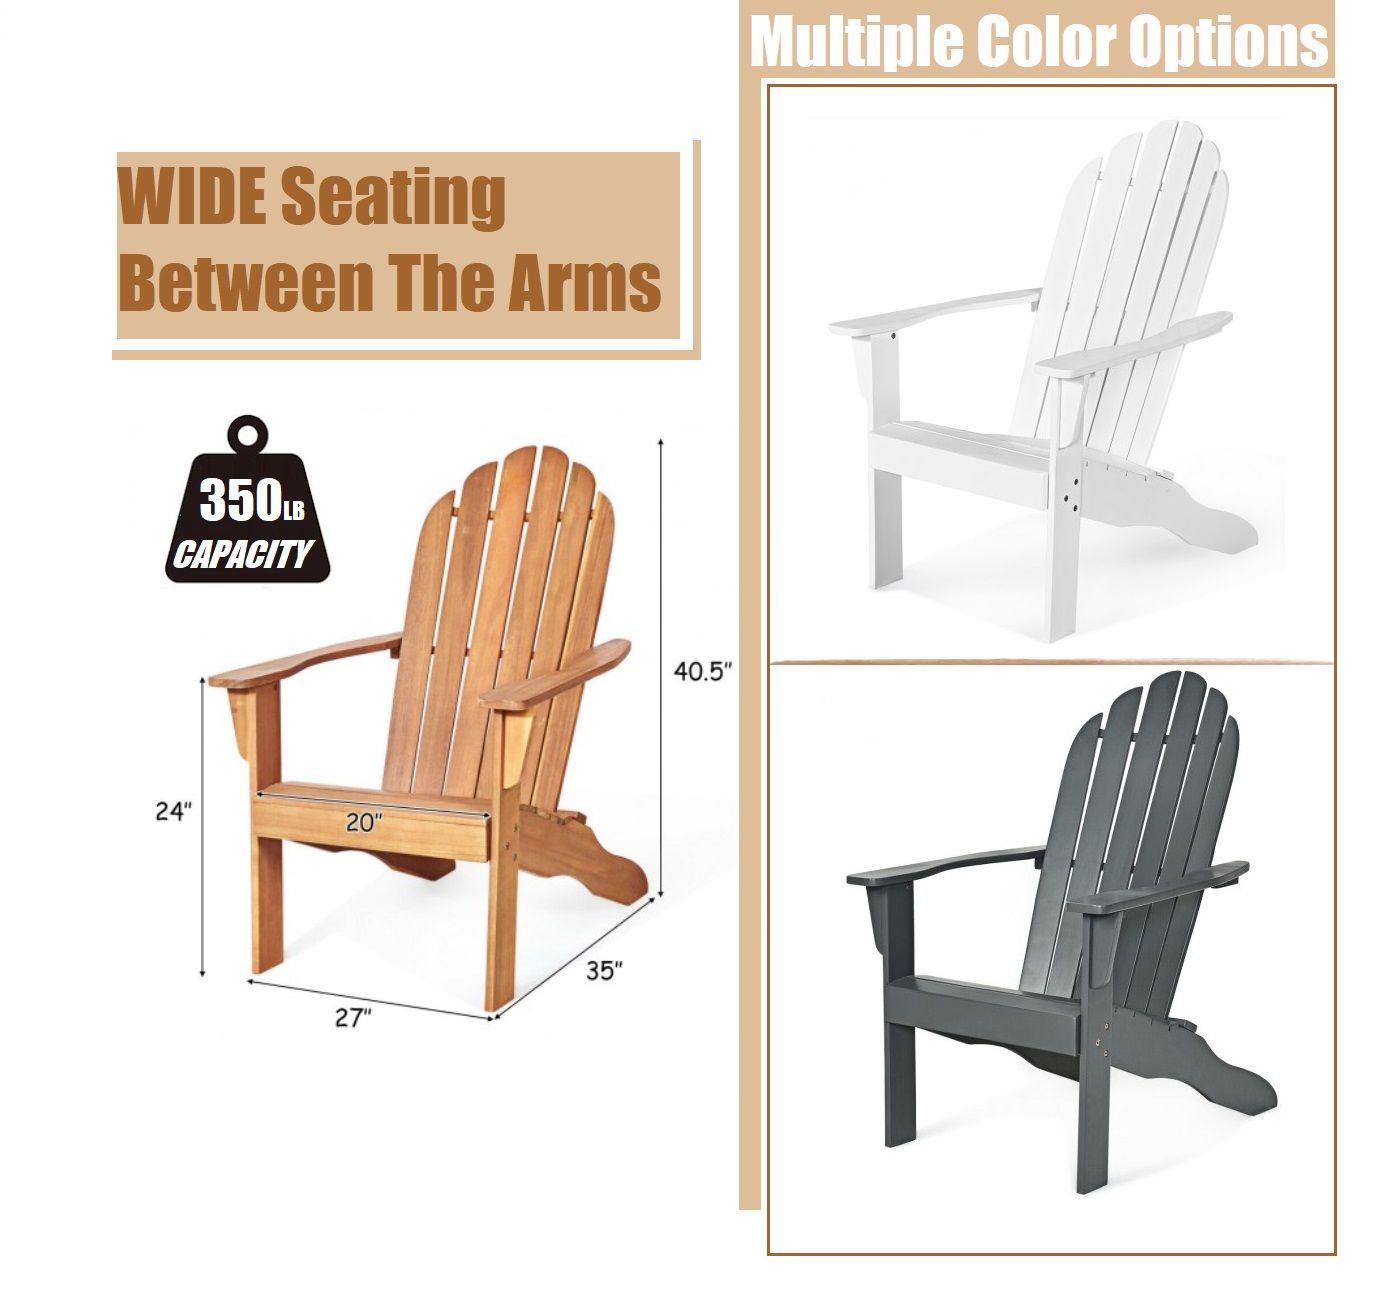 Adirondack Chairs For Tall People | People Living Tall